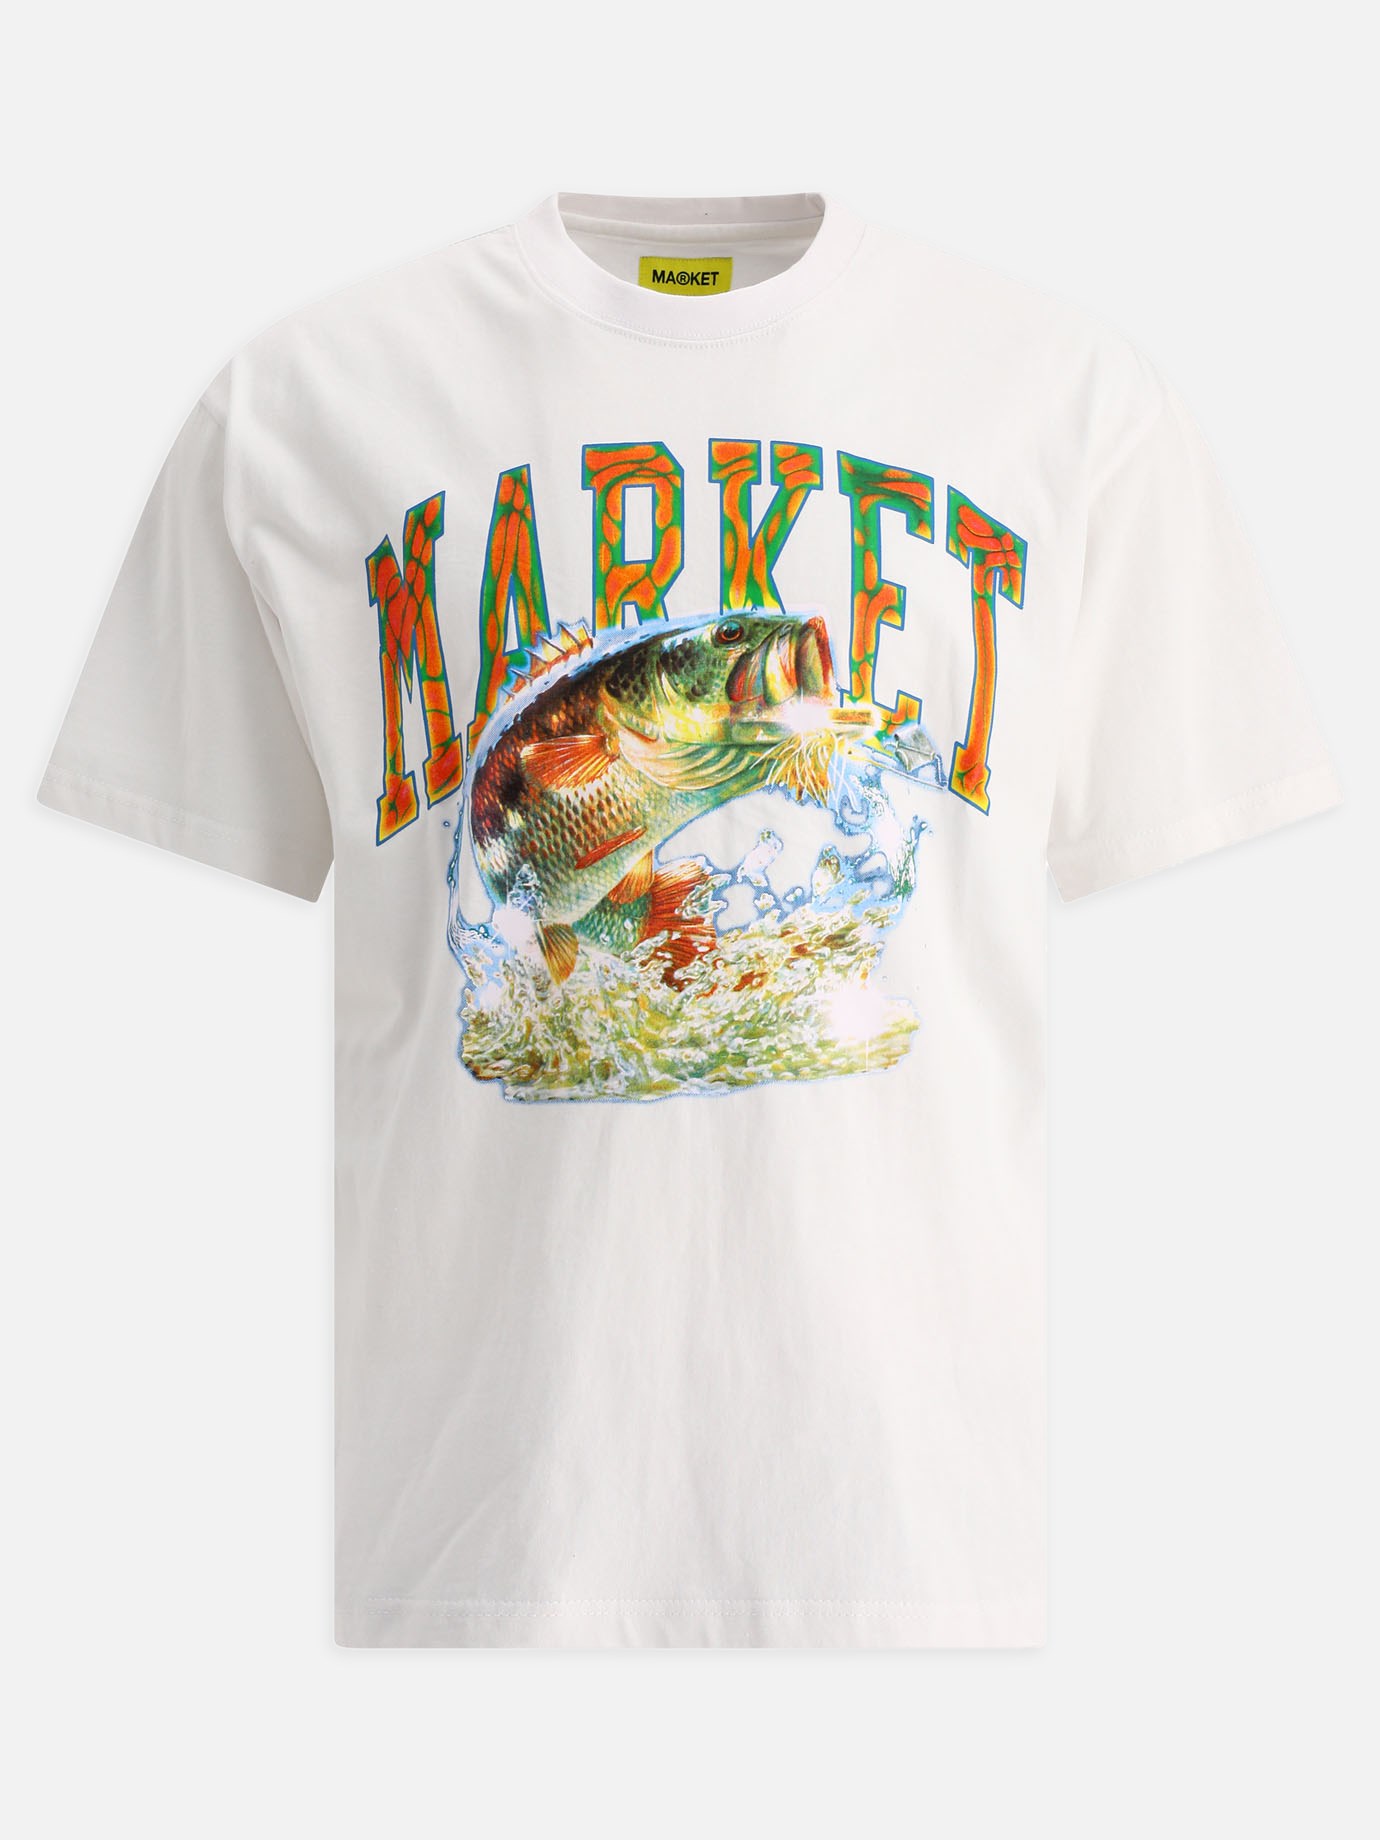  Surf  t-shirtby Market - 1